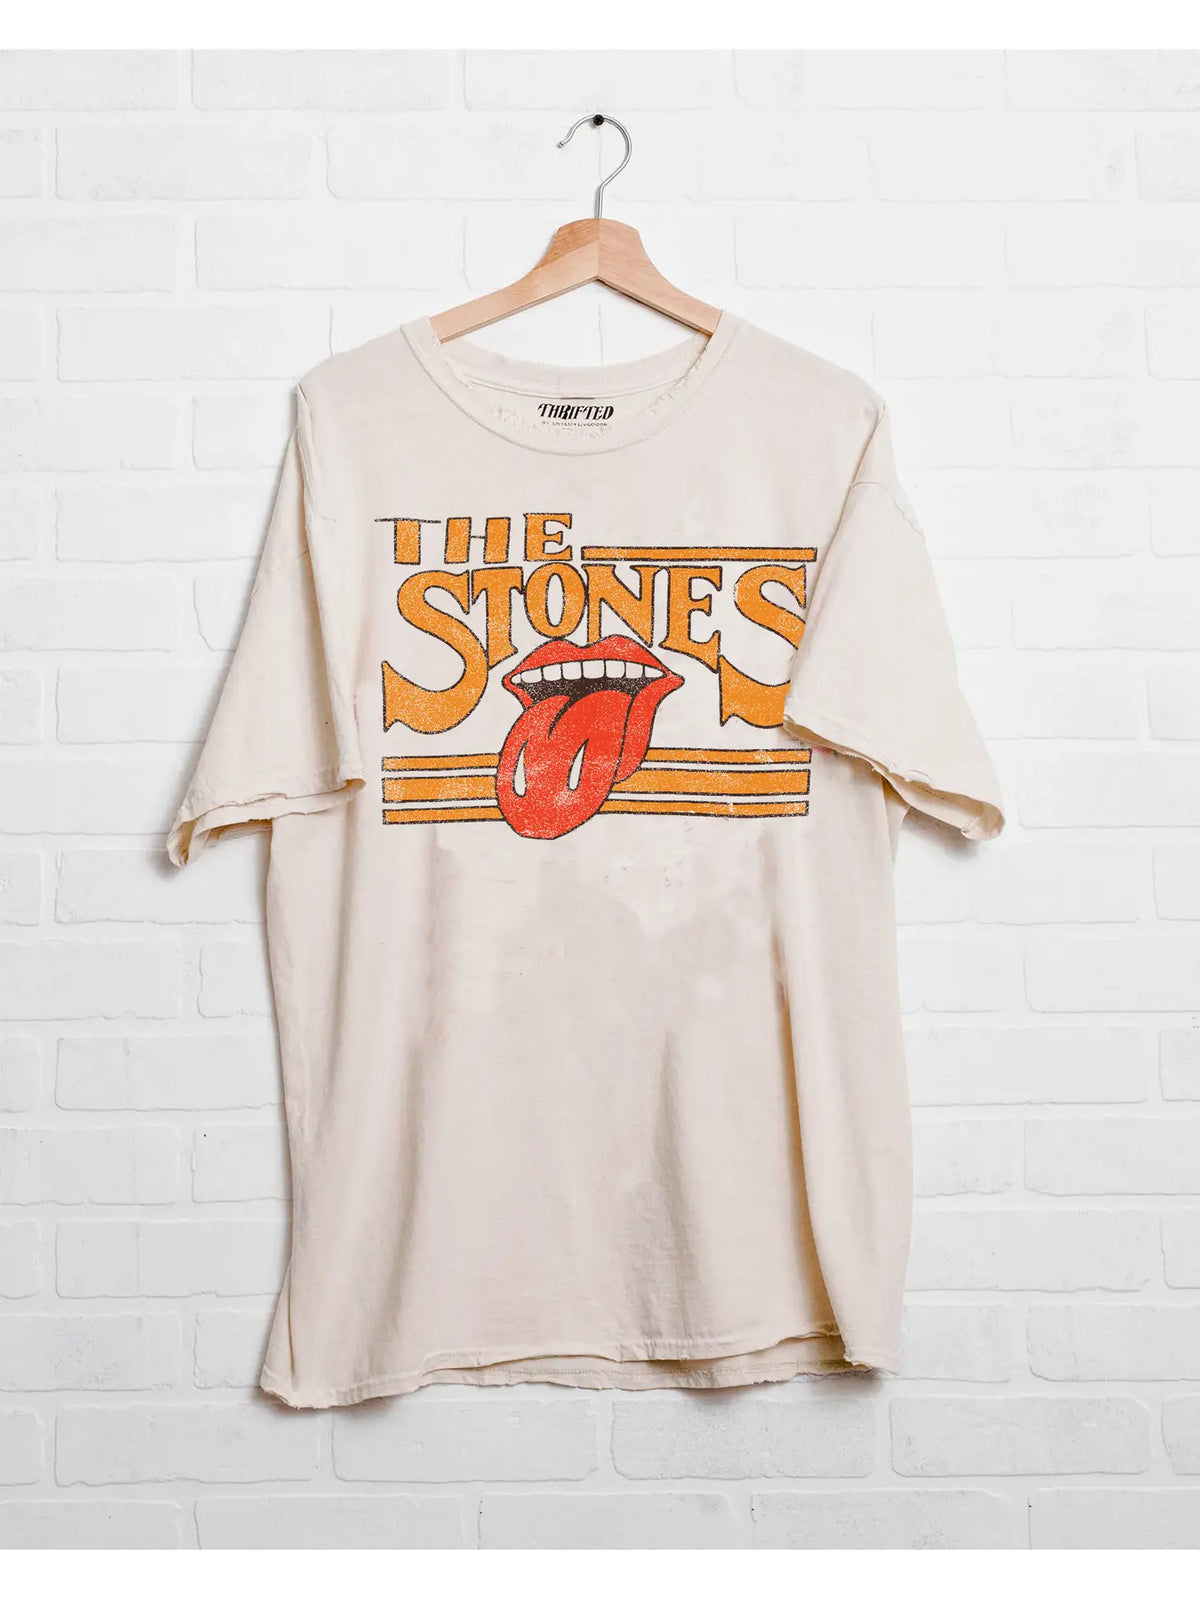 LIVYLU: ROLLING STONES STONED OFF WHITE THRIFTED GRAPHIC TEE